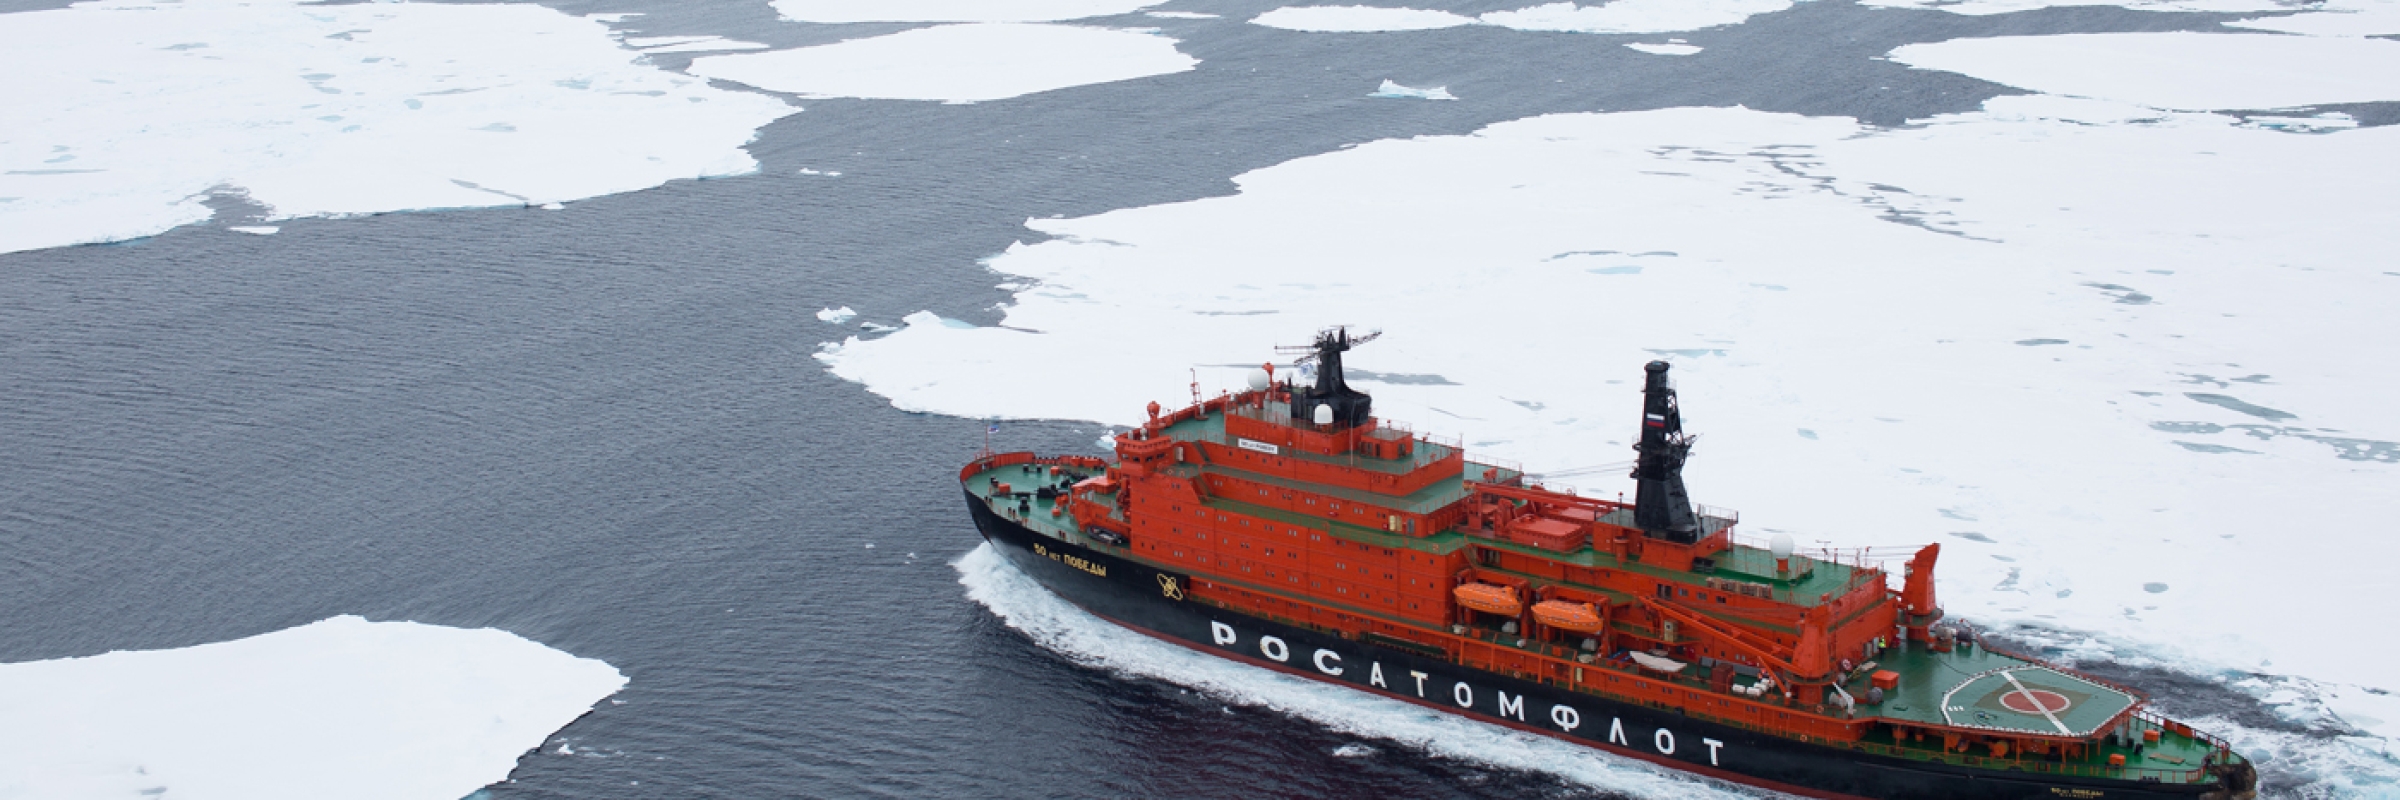 50 Years of Victory on its way to the North Pole 